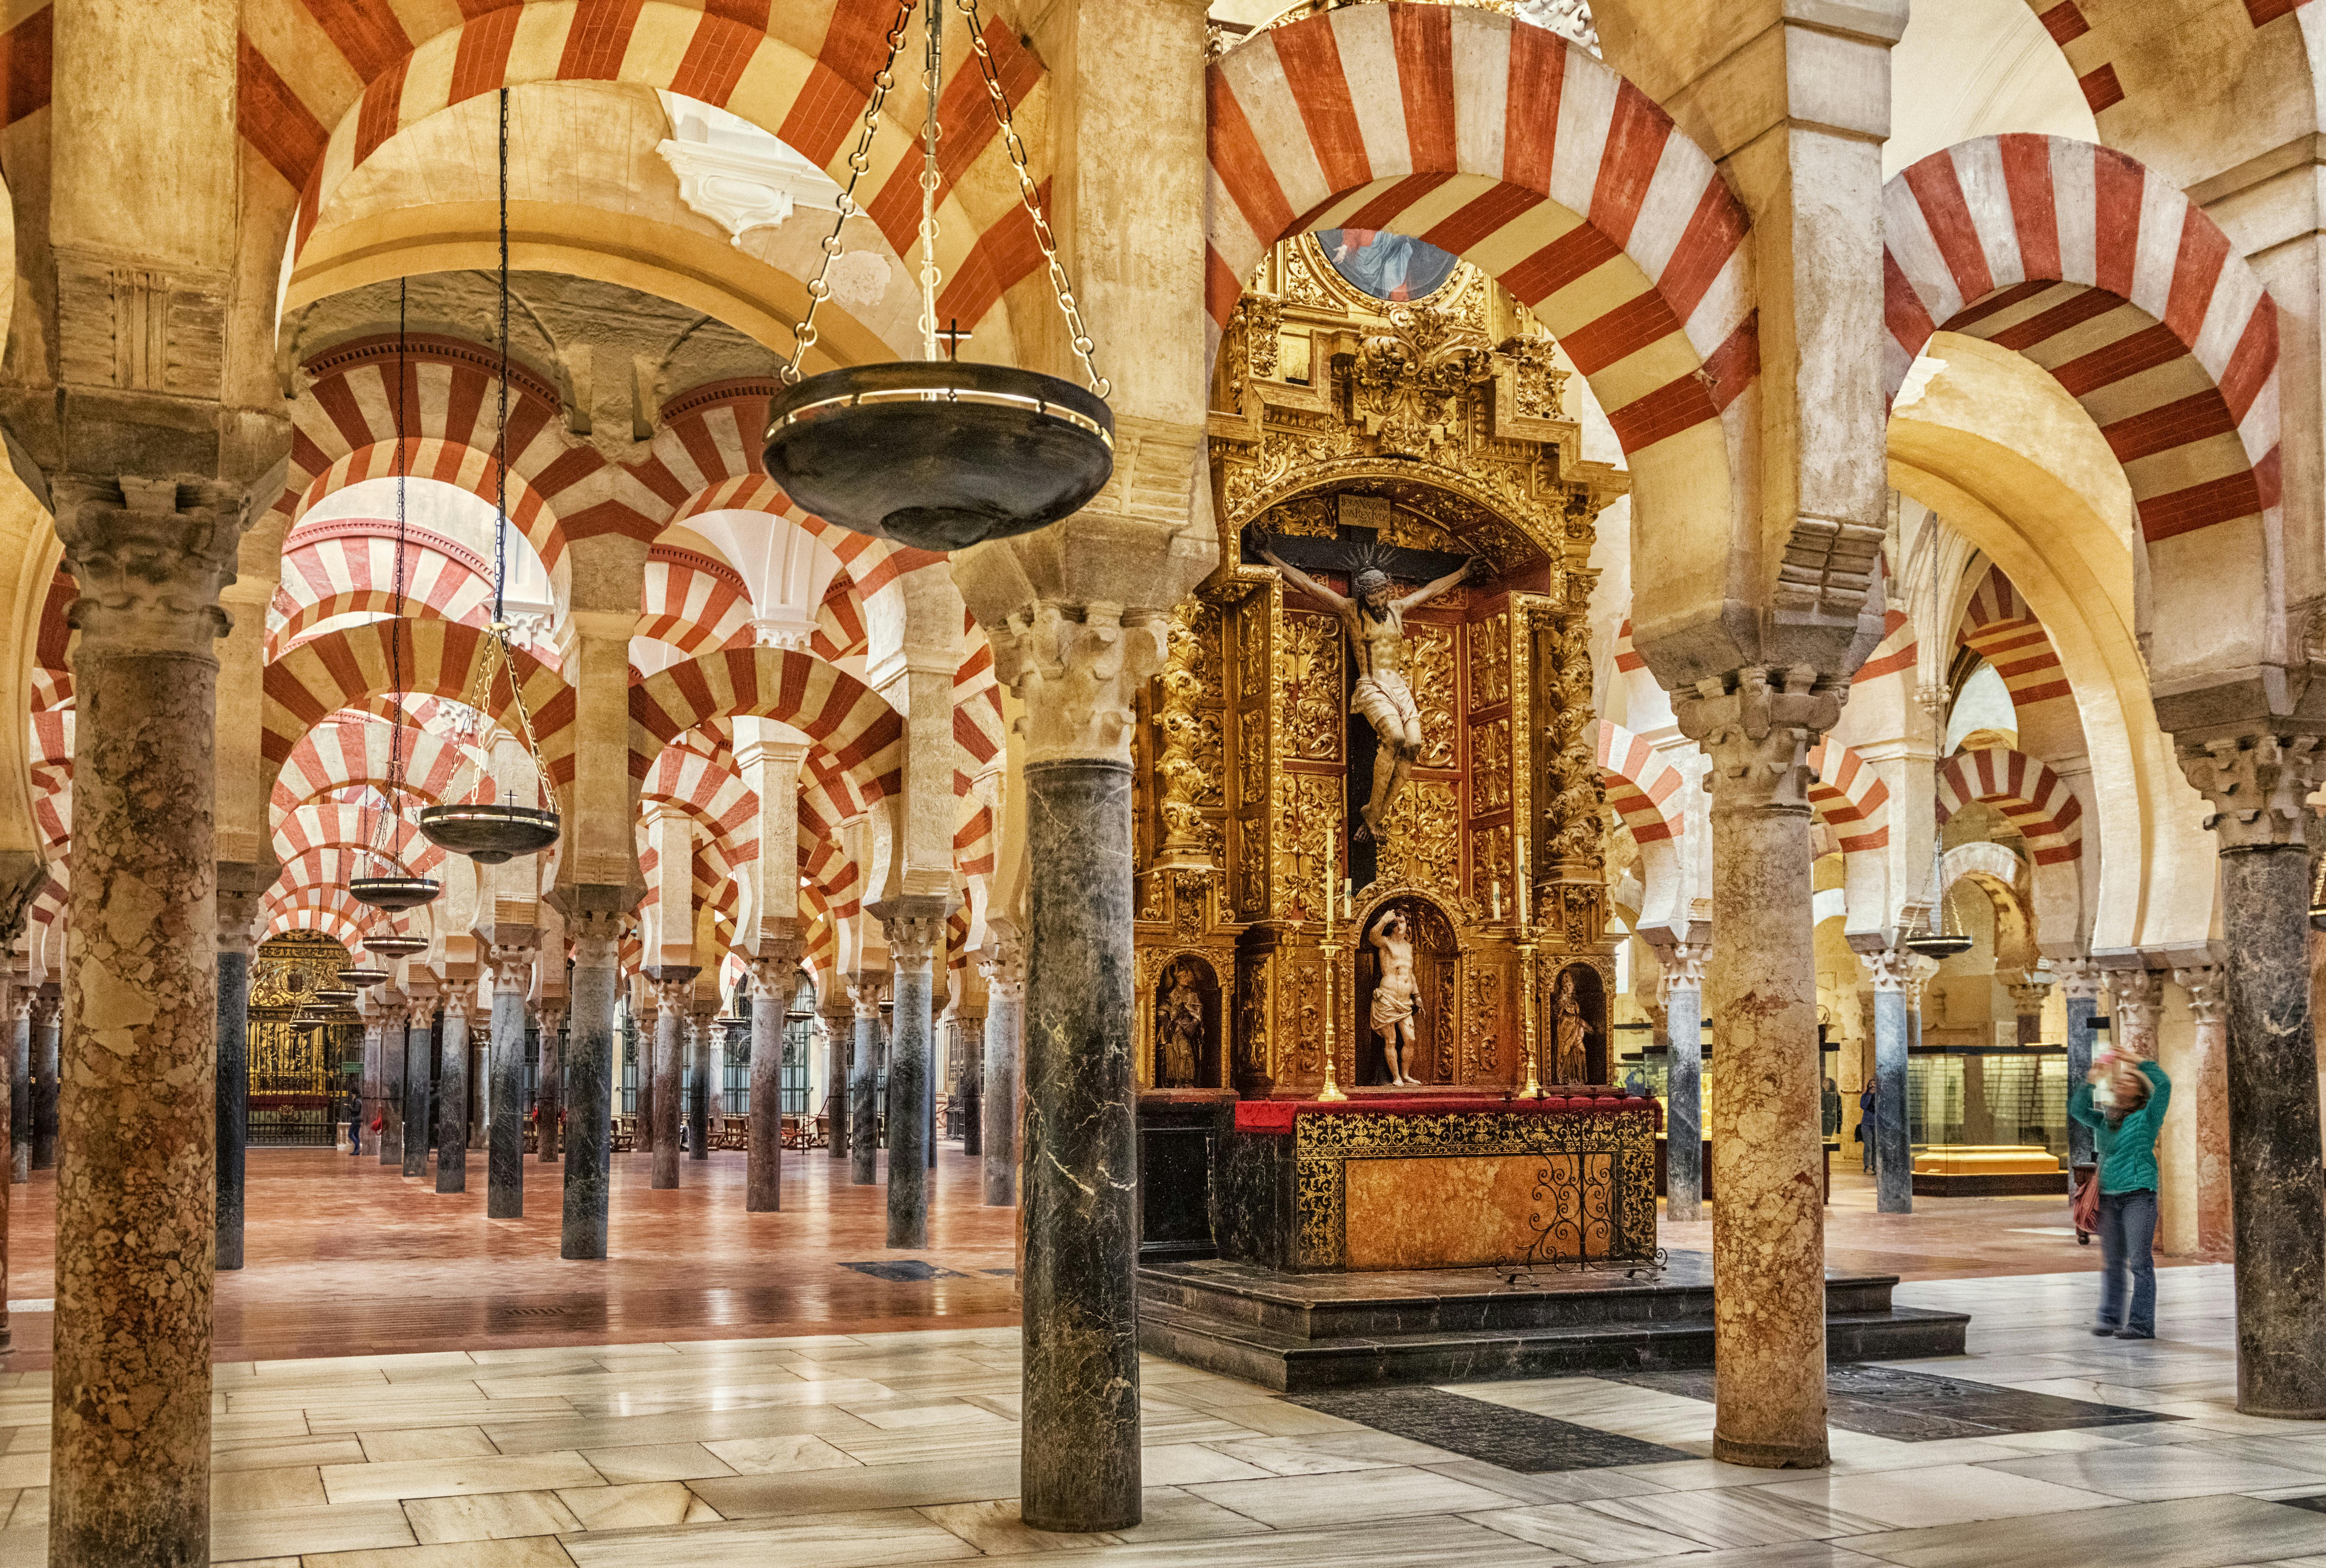 Mosque of Cordoba small-group tour with entrance tickets Musement